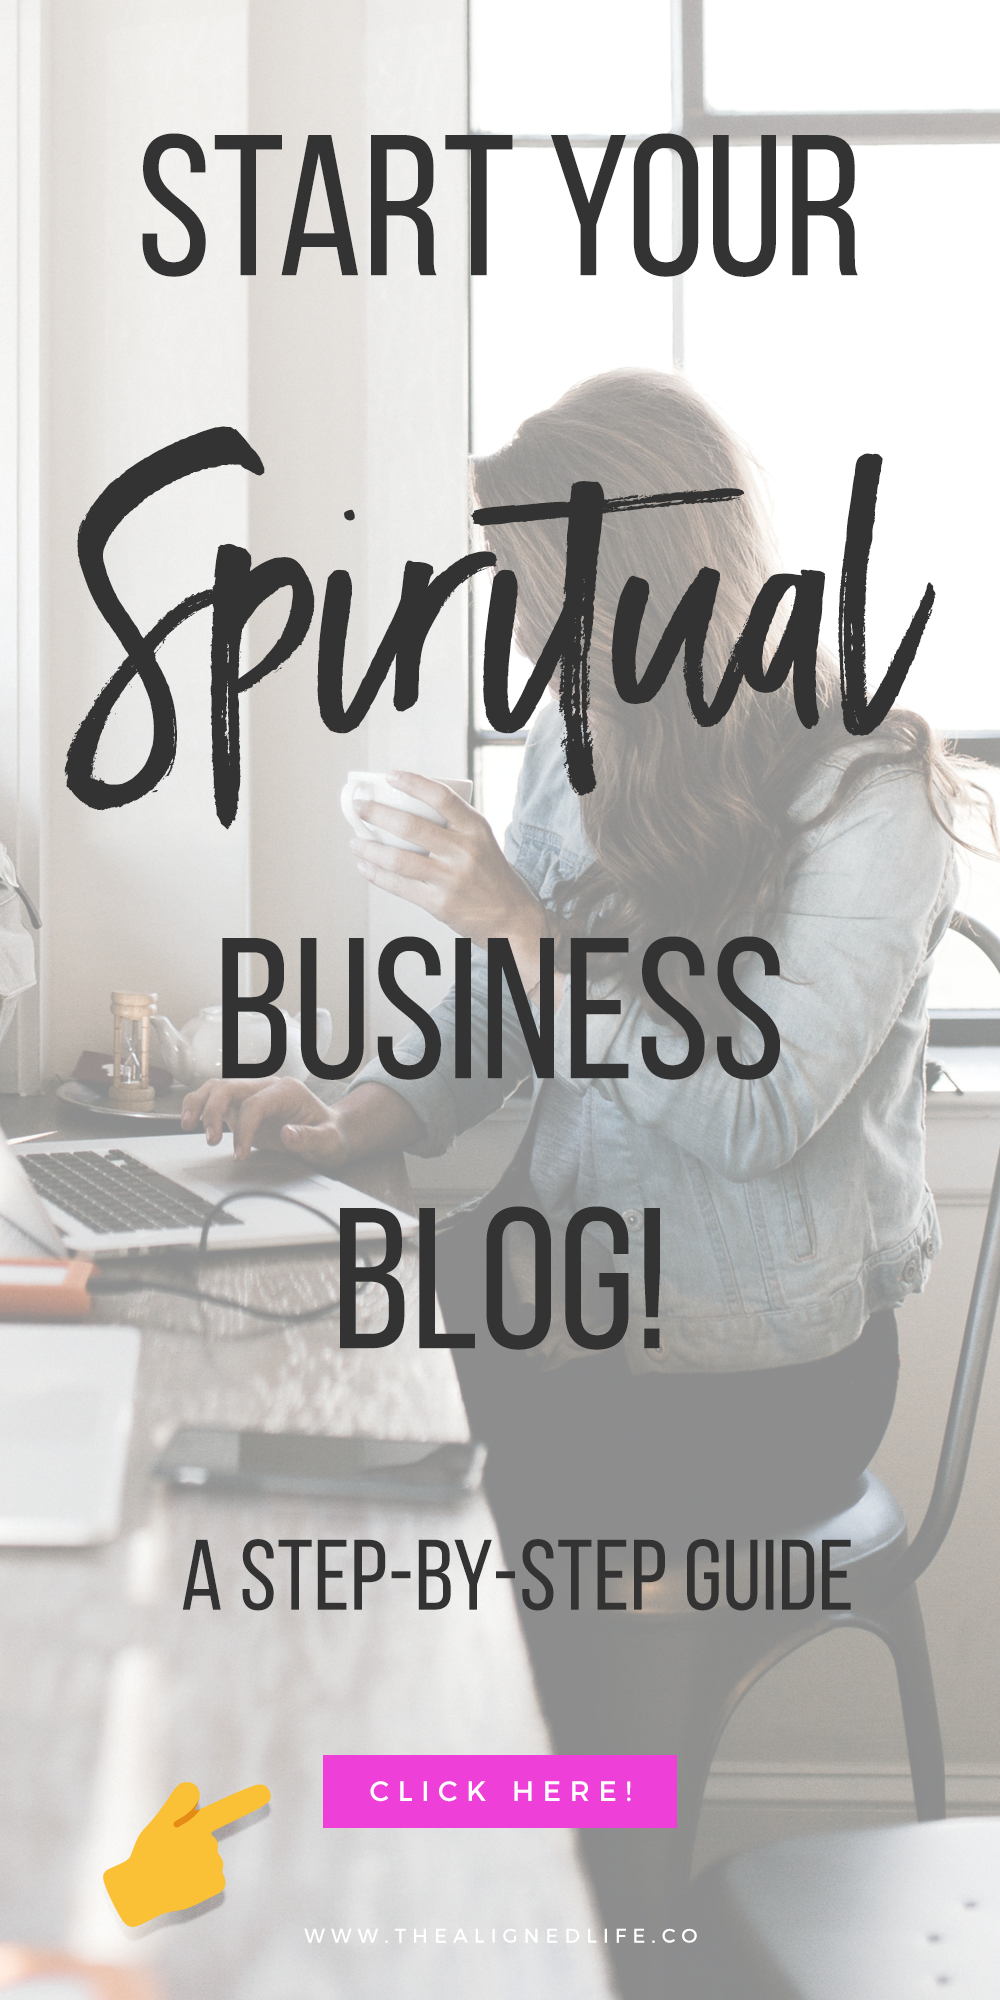 How To Start A Blog For Your Spiritual Business